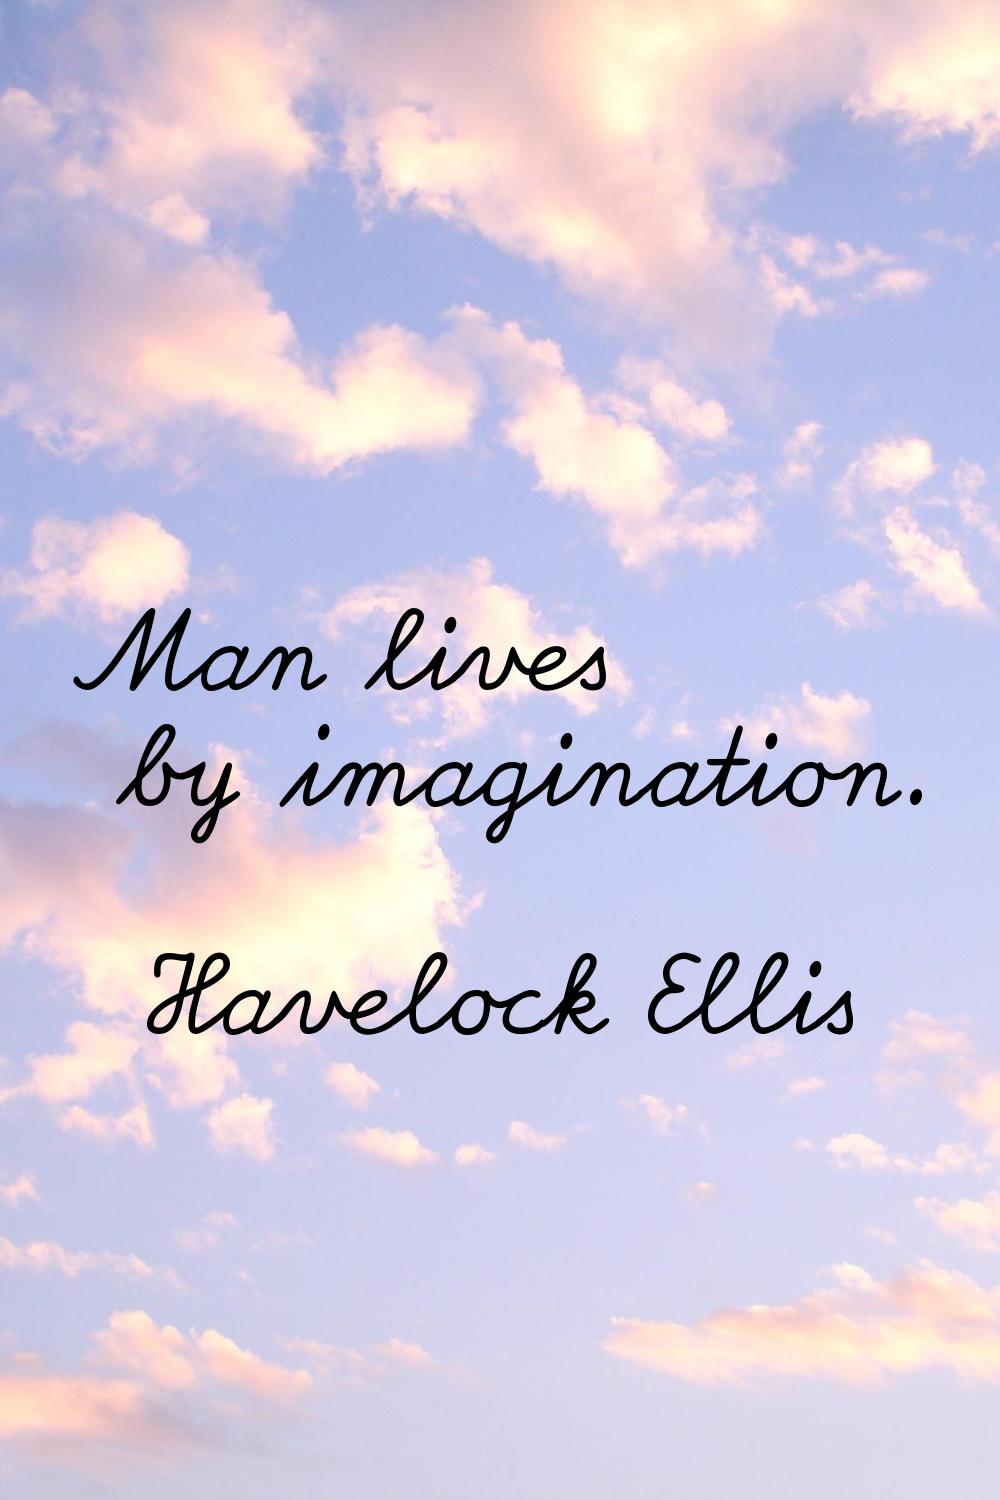 Man lives by imagination.